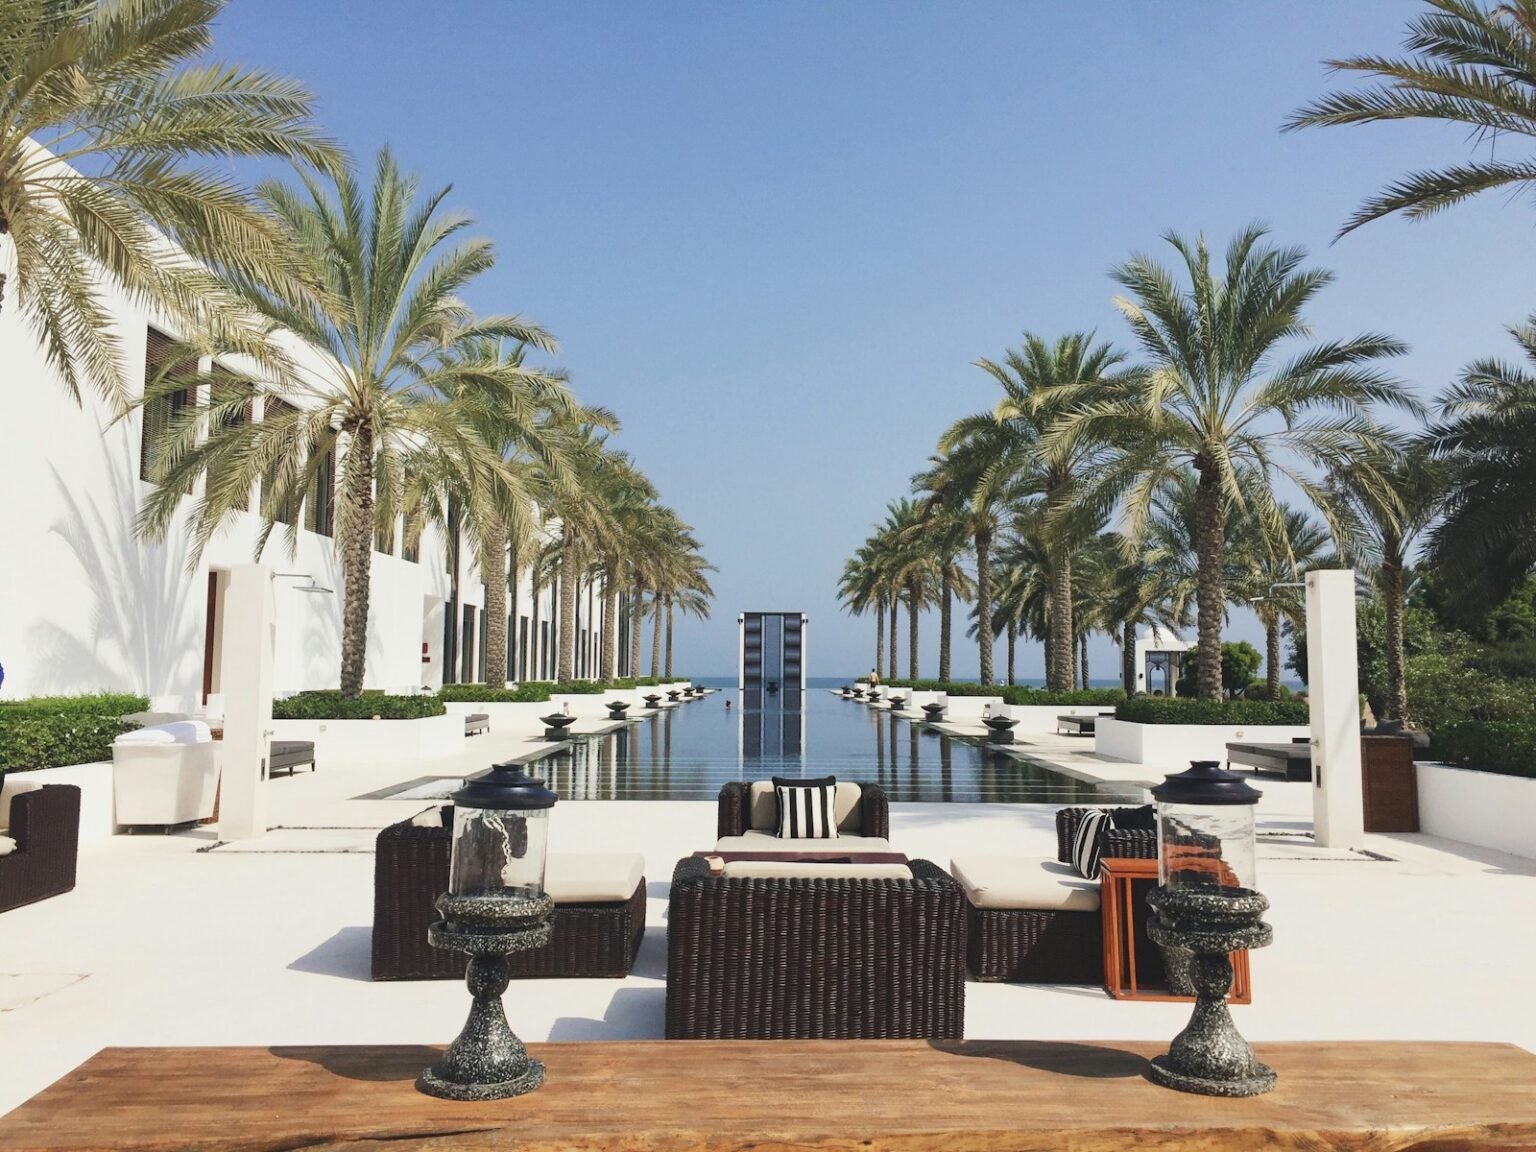 The Chedi Muscat – a GHM hotel, 18th November Street, Muscat, Oman